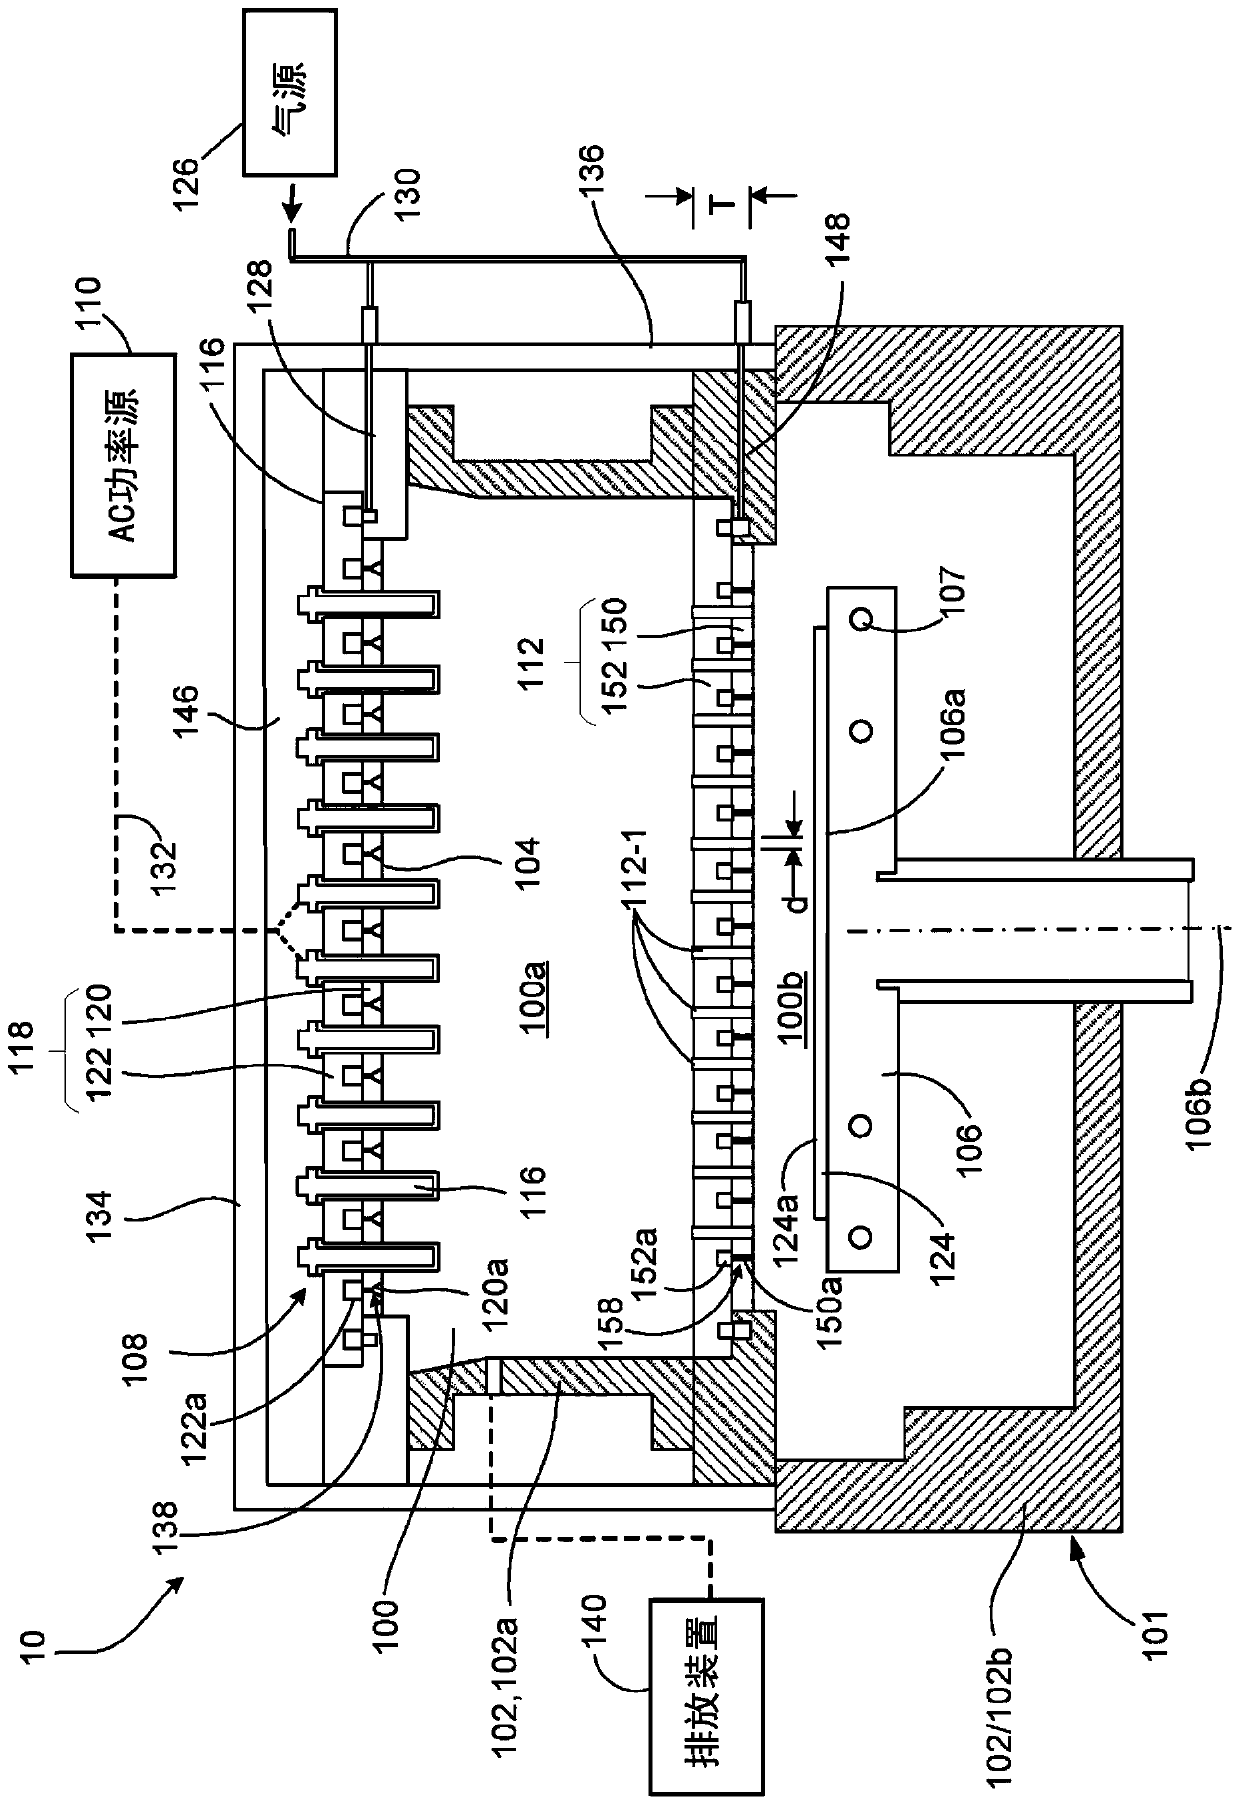 Monopole antenna array source for semiconductor process equipment